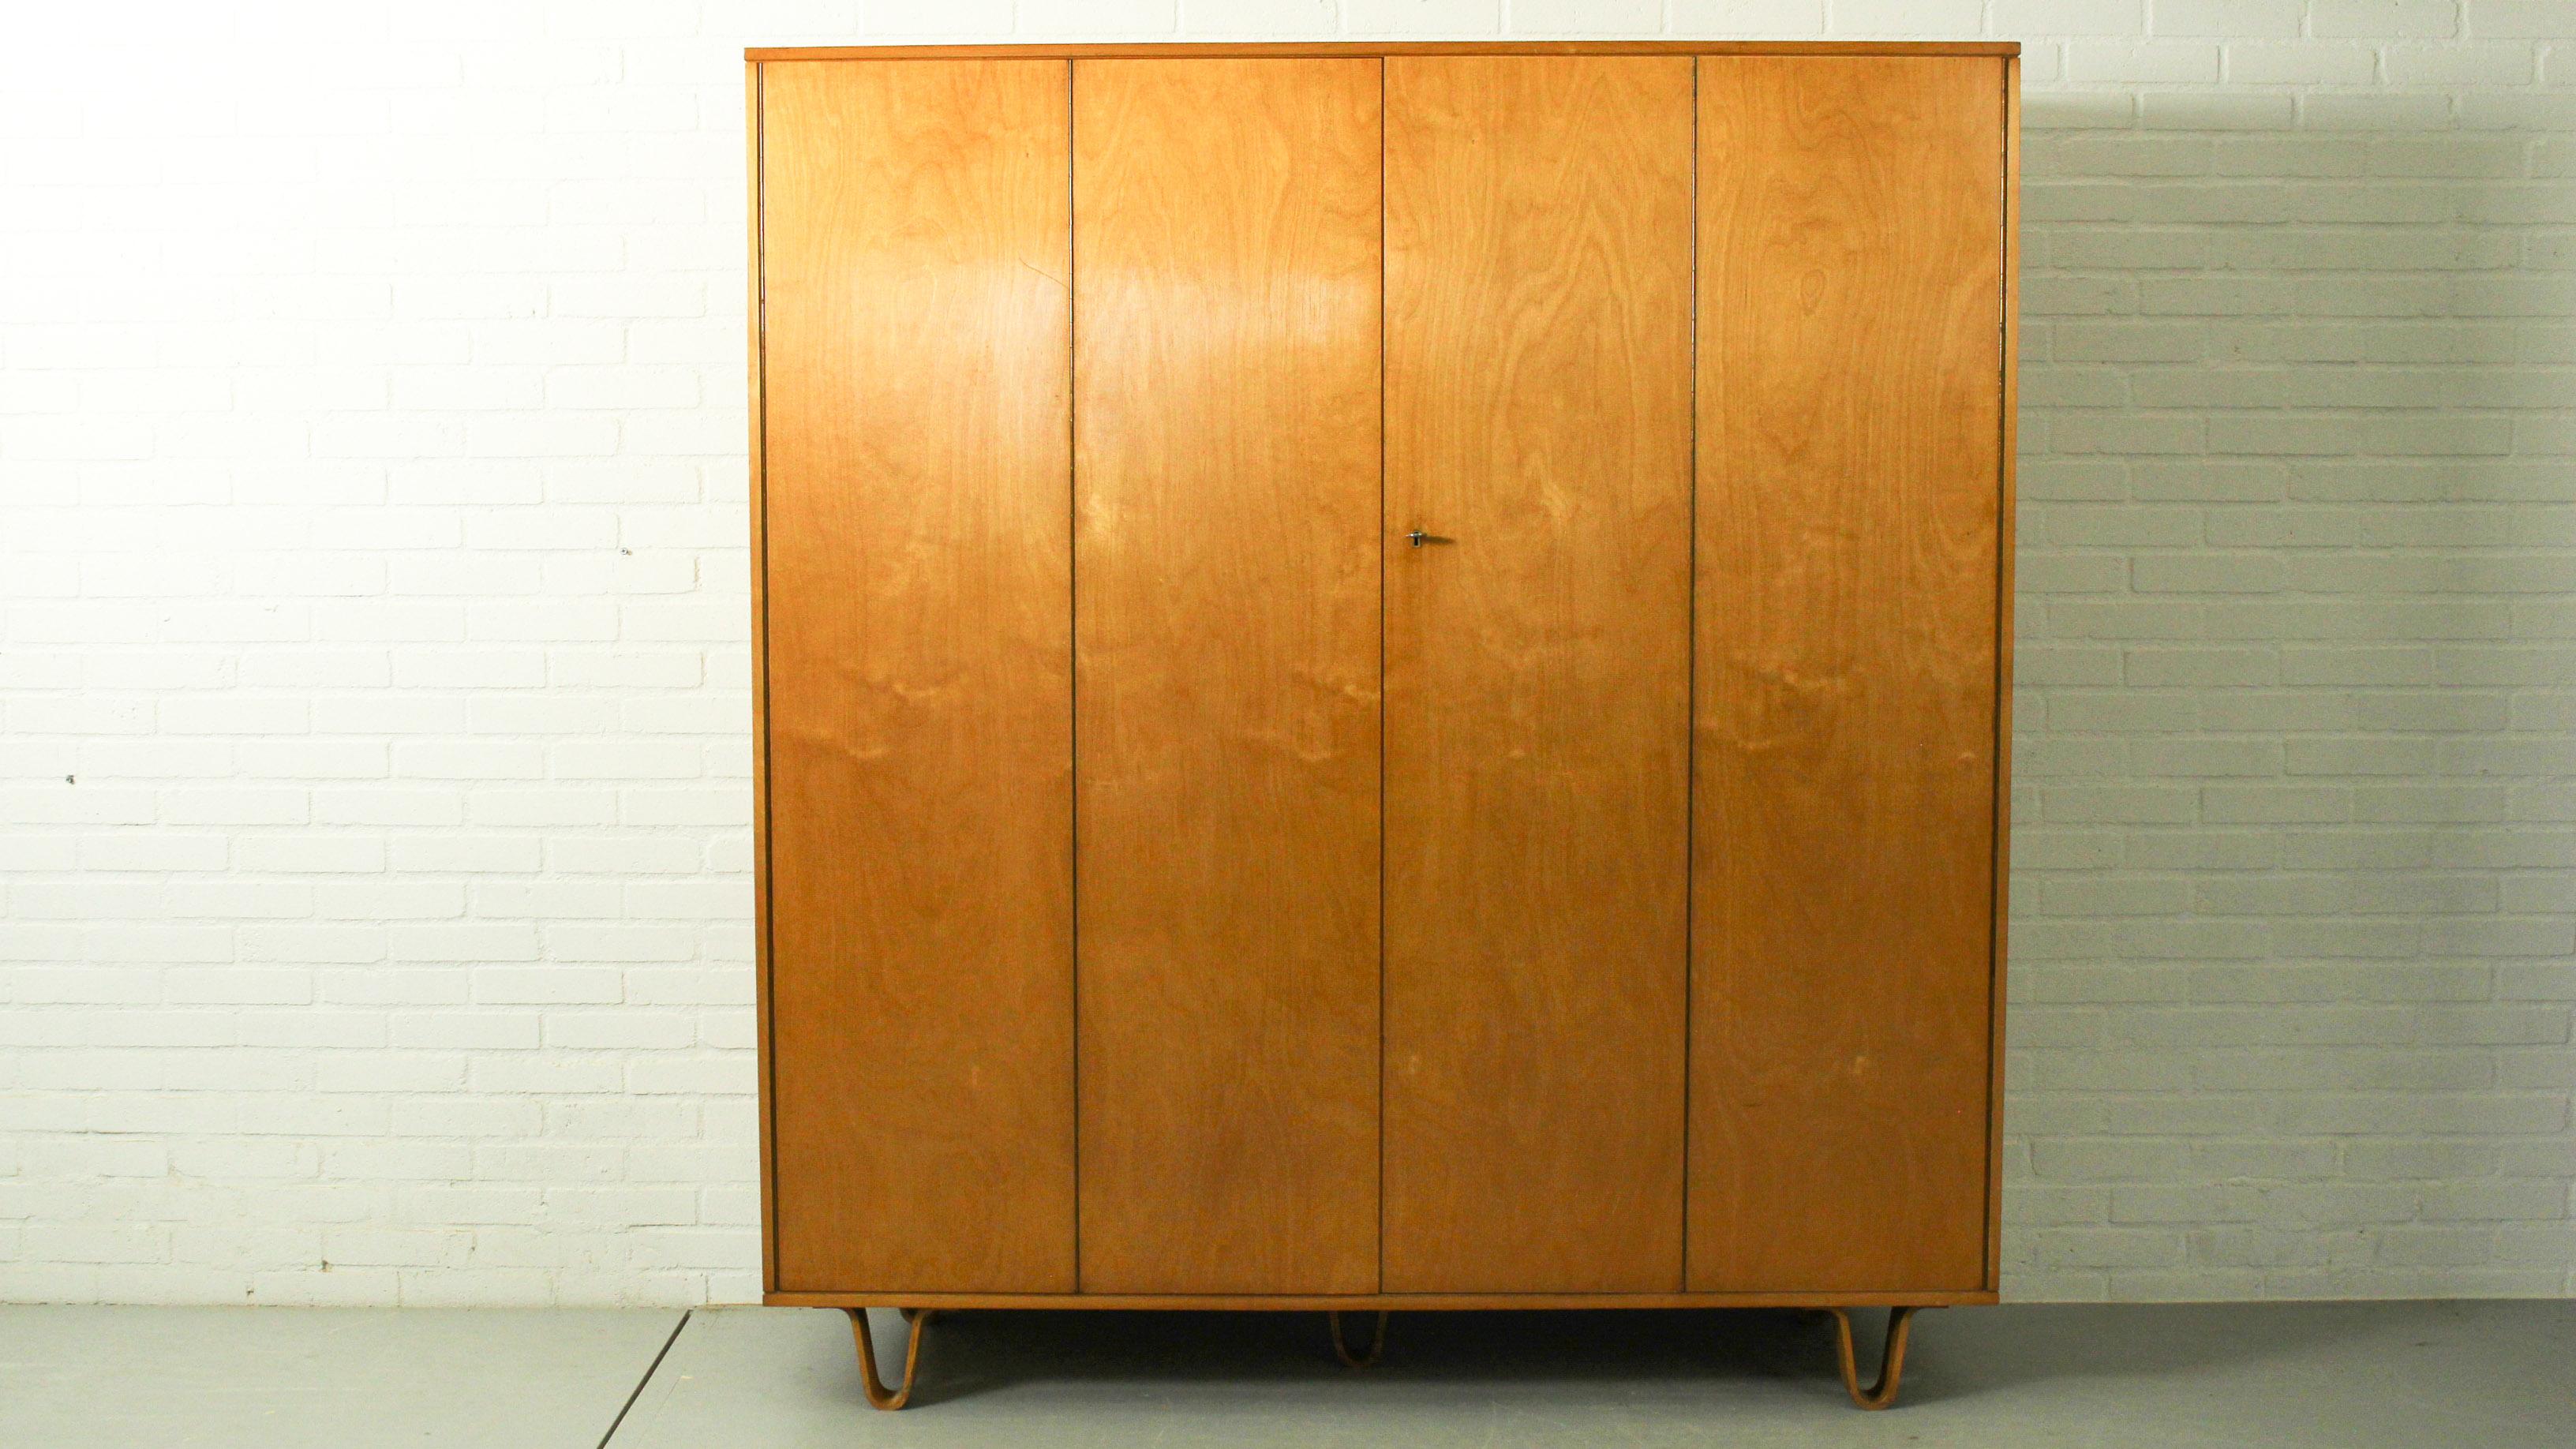 Large cabinet (KB04) made by Cees Braakman for Pastoe. This cabinet has two folding doors, behind the doors shelves are hidden, with original bentwood drawer and bentwood box attached to door. Makers stamp and notes on backside. This cabinet